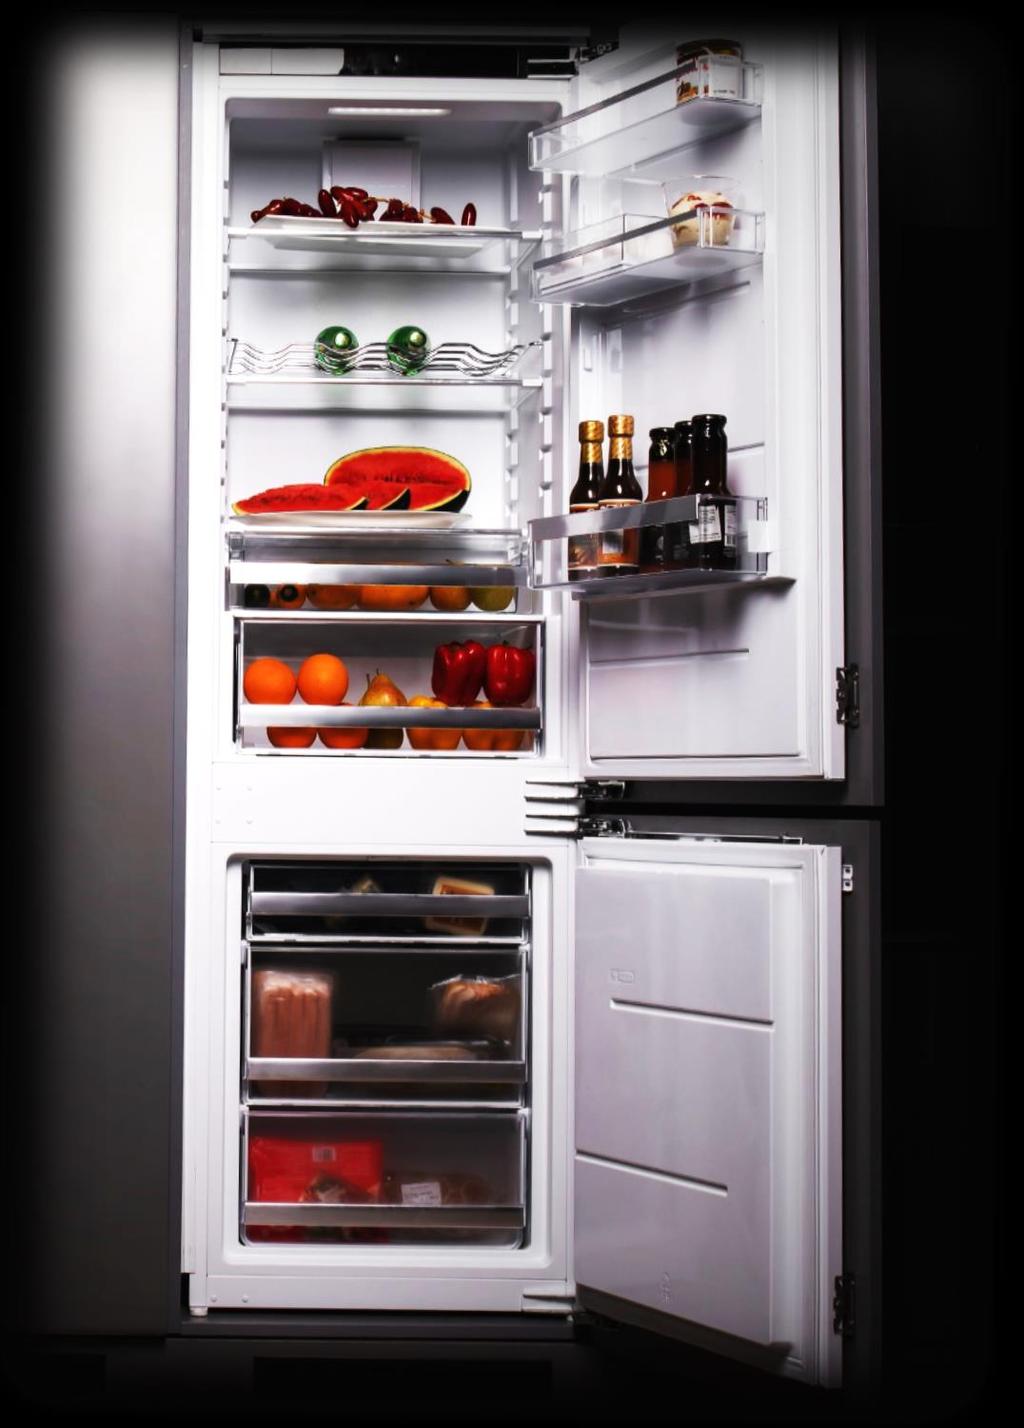 The fridge freeze combination model gives you a complete solution for your daily needs of storing food.